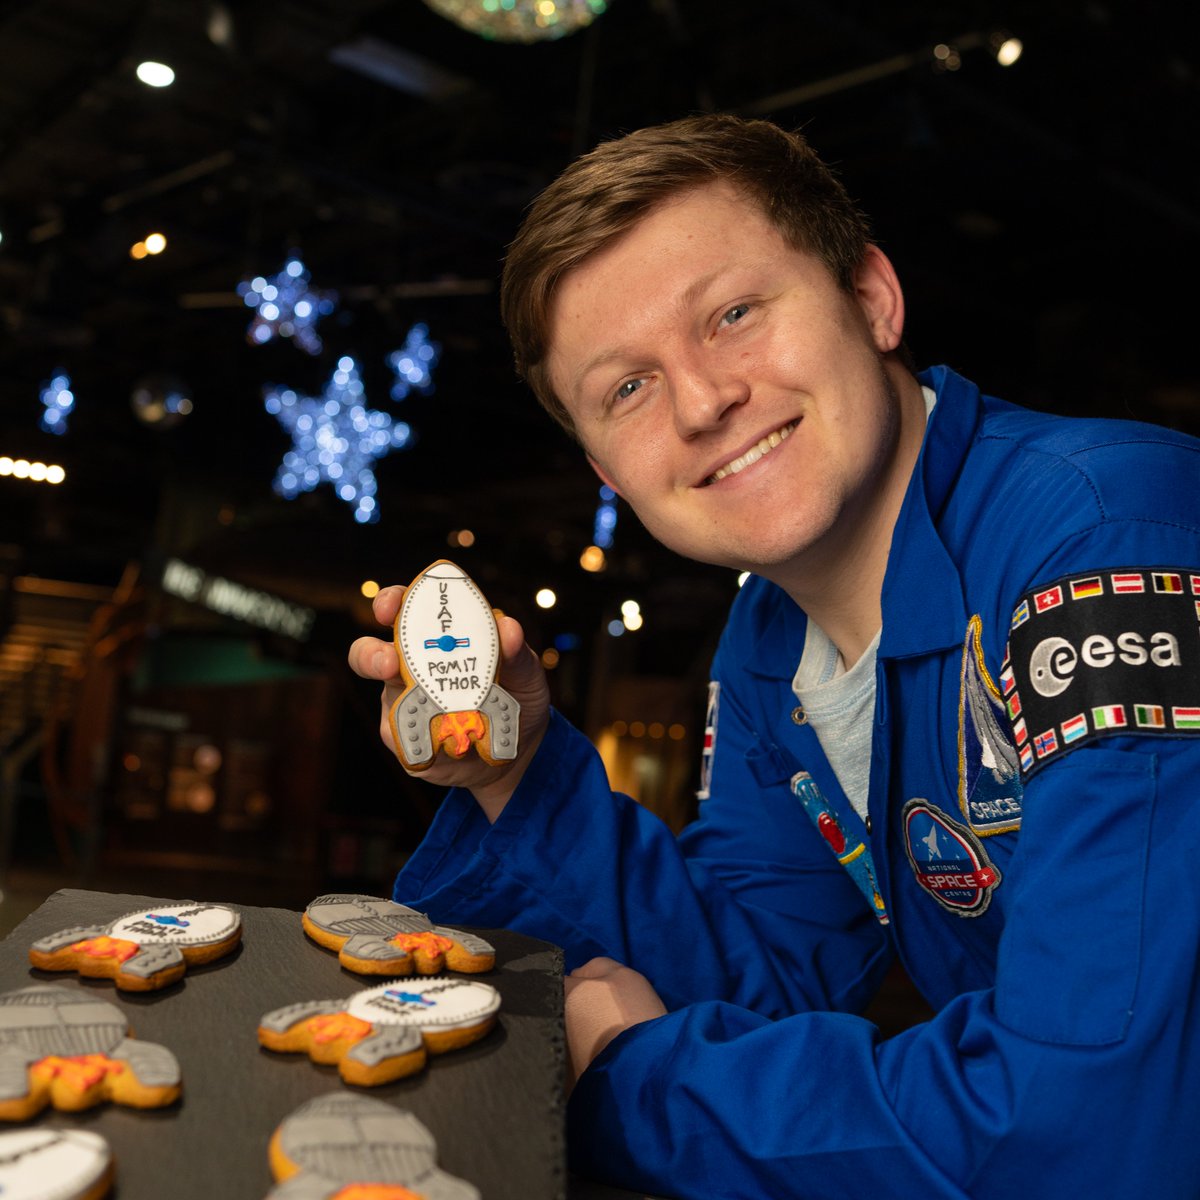 🚀 T-2 days until #MissionBake launches on @instagram on Friday 10 May. 🍰 @joshpsmalley's first space-themed bake is going to be gingerbread rockets, inspired by Thor Able and Blue Streak in our Rocket Tower and made in his Science Kitchen @uniofleicester.